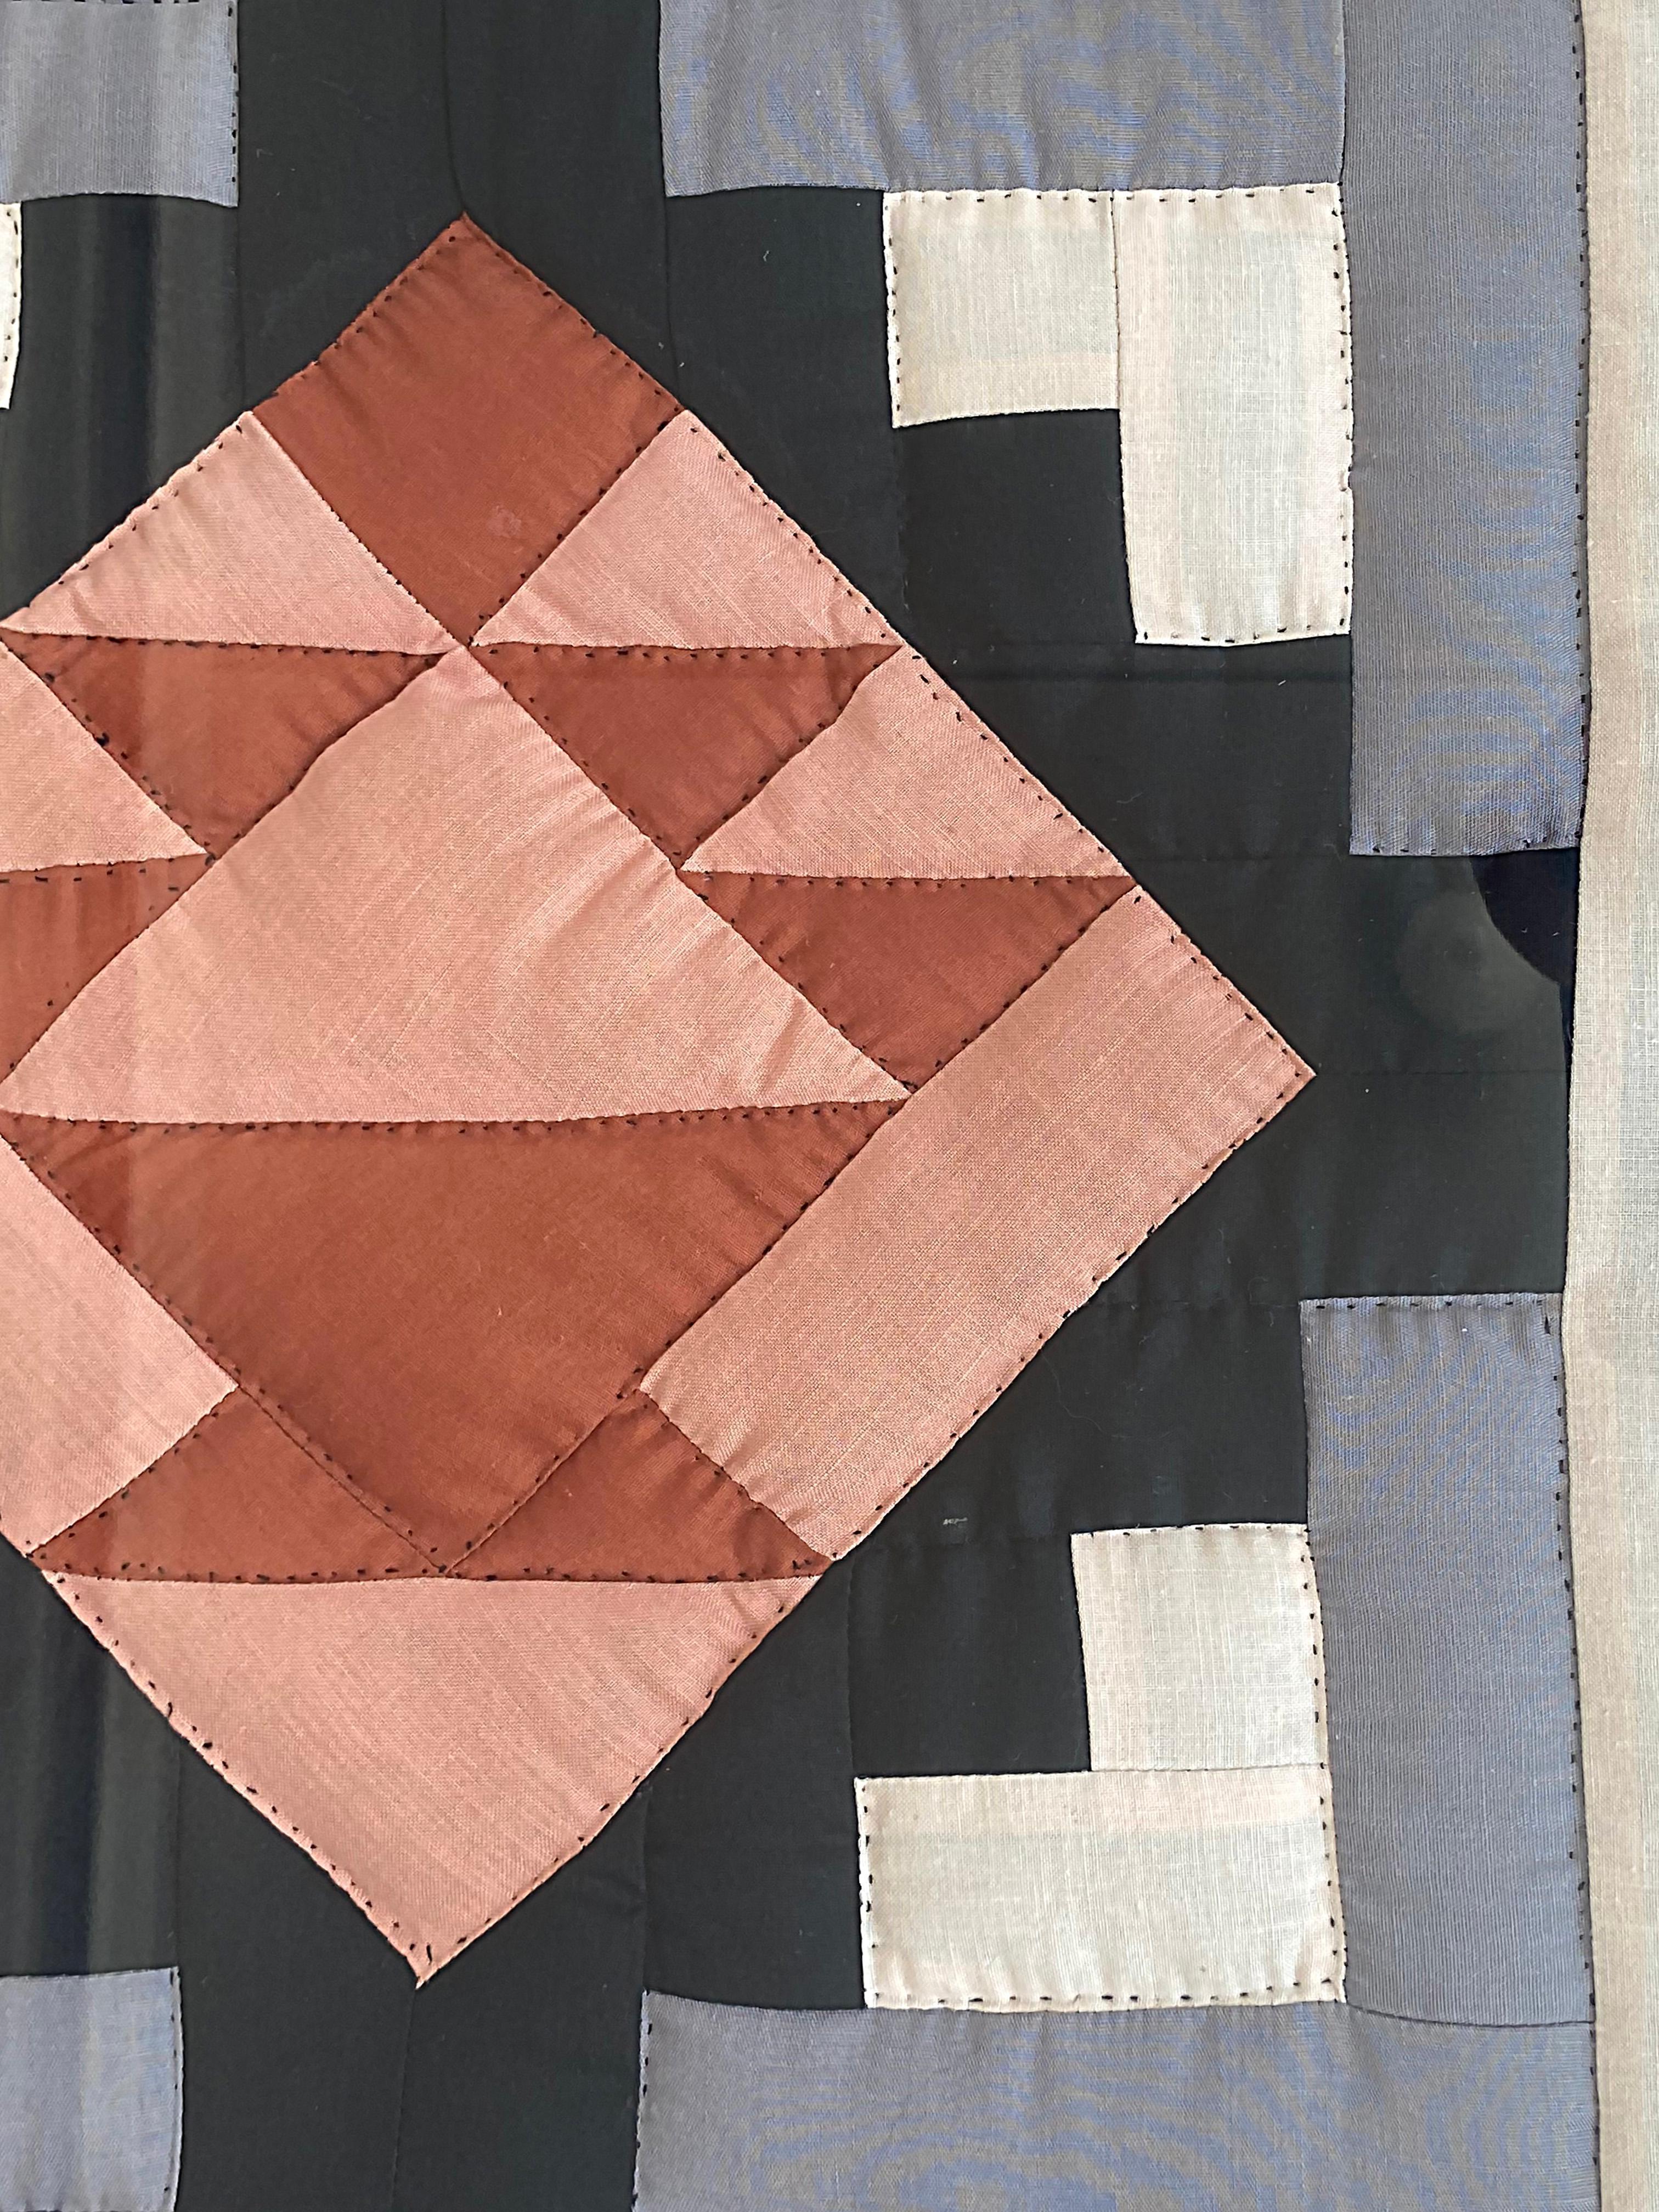 Vintage Framed Quilted Geometric Textile

Offered for sale is a vintage late 20th-century framed geometric quilt created with the basket pattern. The quilt is nicely framed and ready to hang. The reverse shows the undersides of the quilt and all